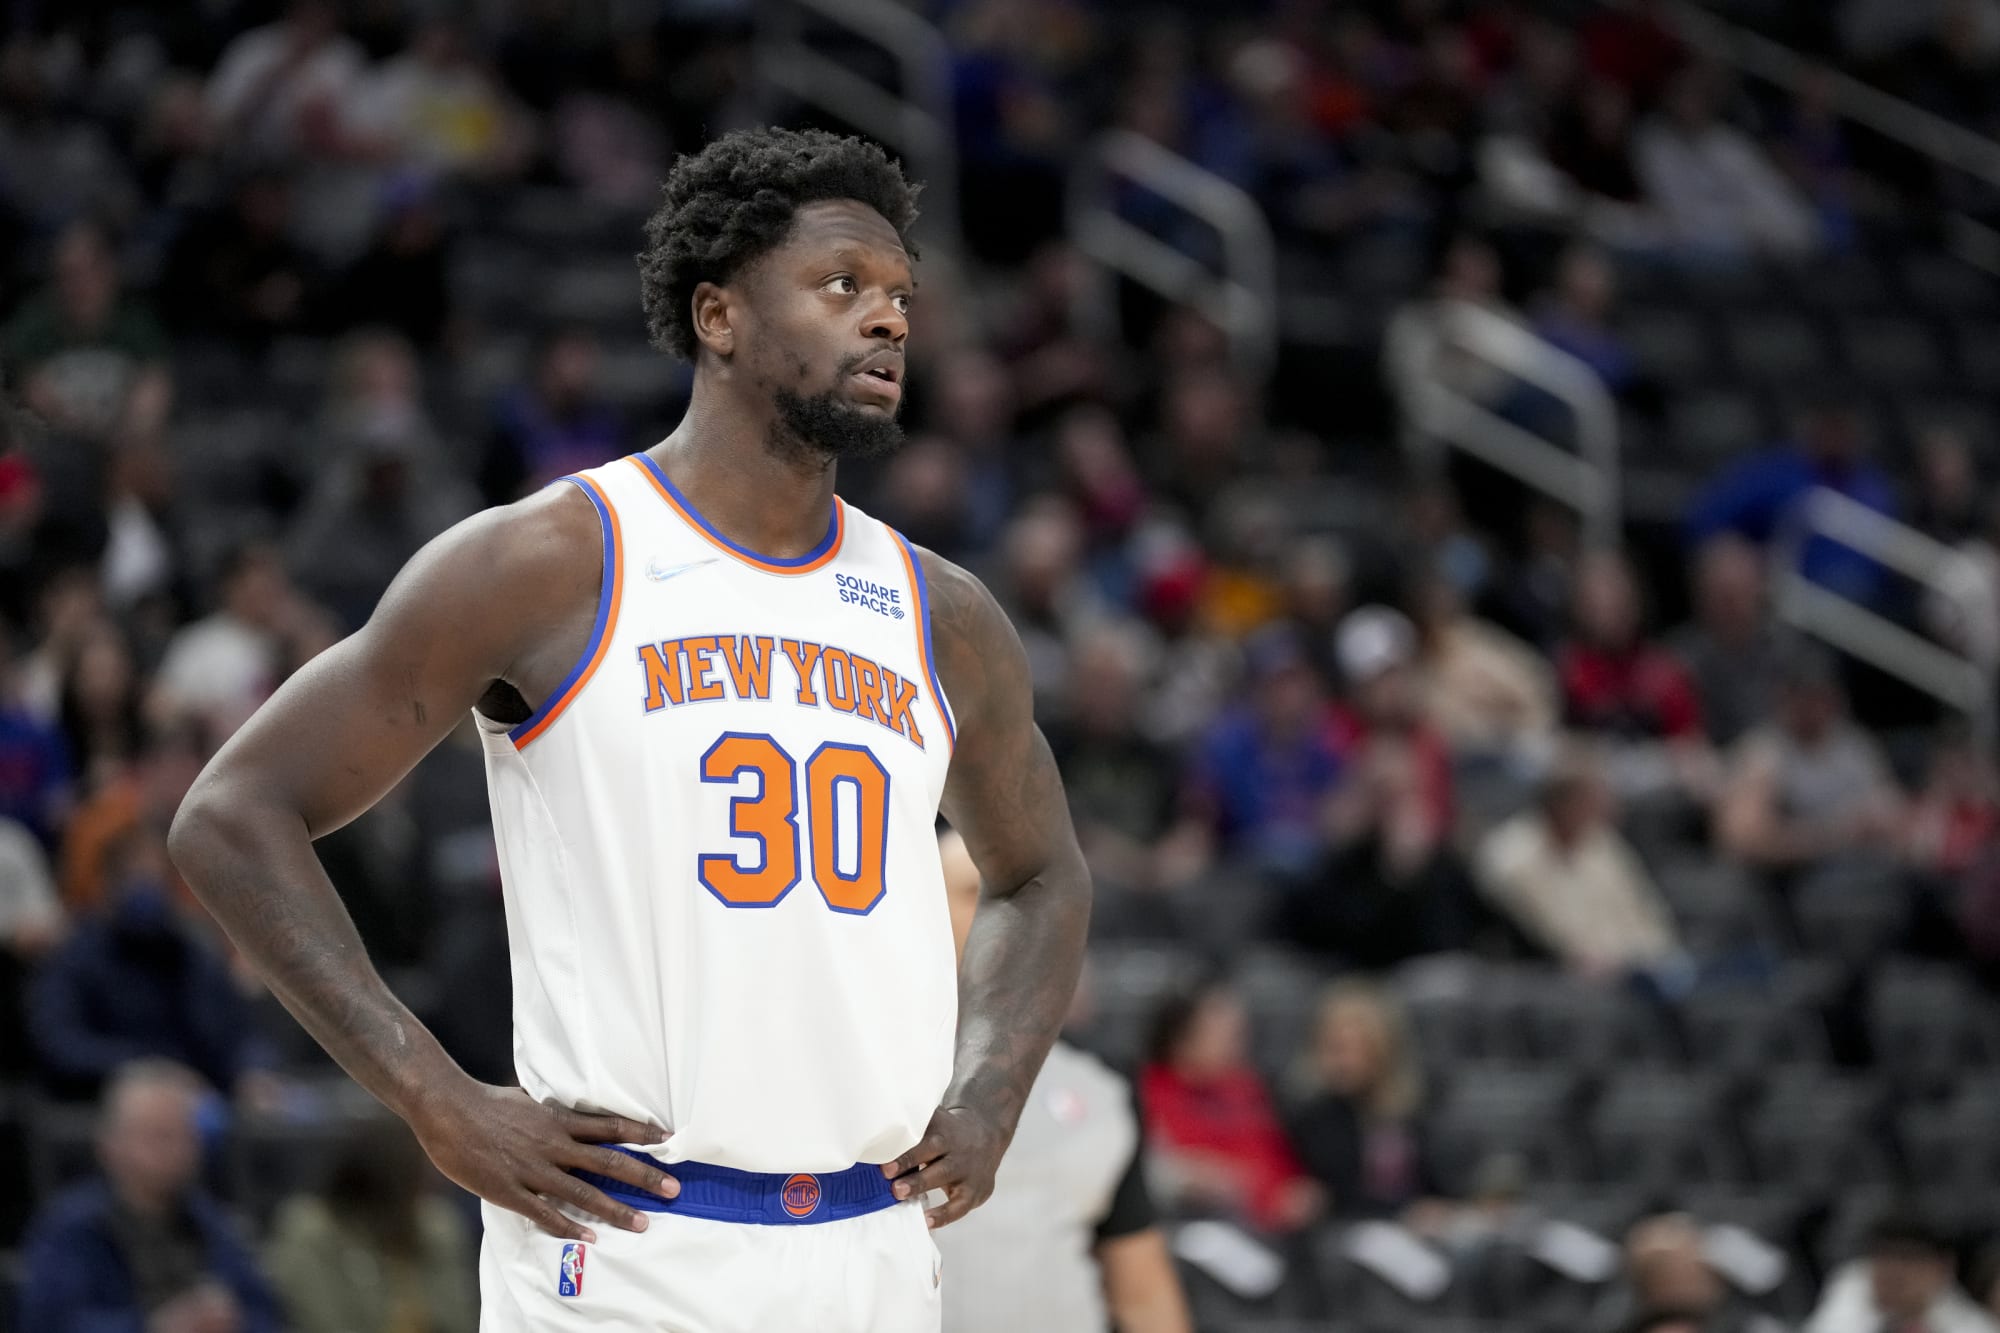 Julius Randle Blue New York Knicks Game-Used #30 Jersey vs. New Orleans  Pelicans on October 30 2021